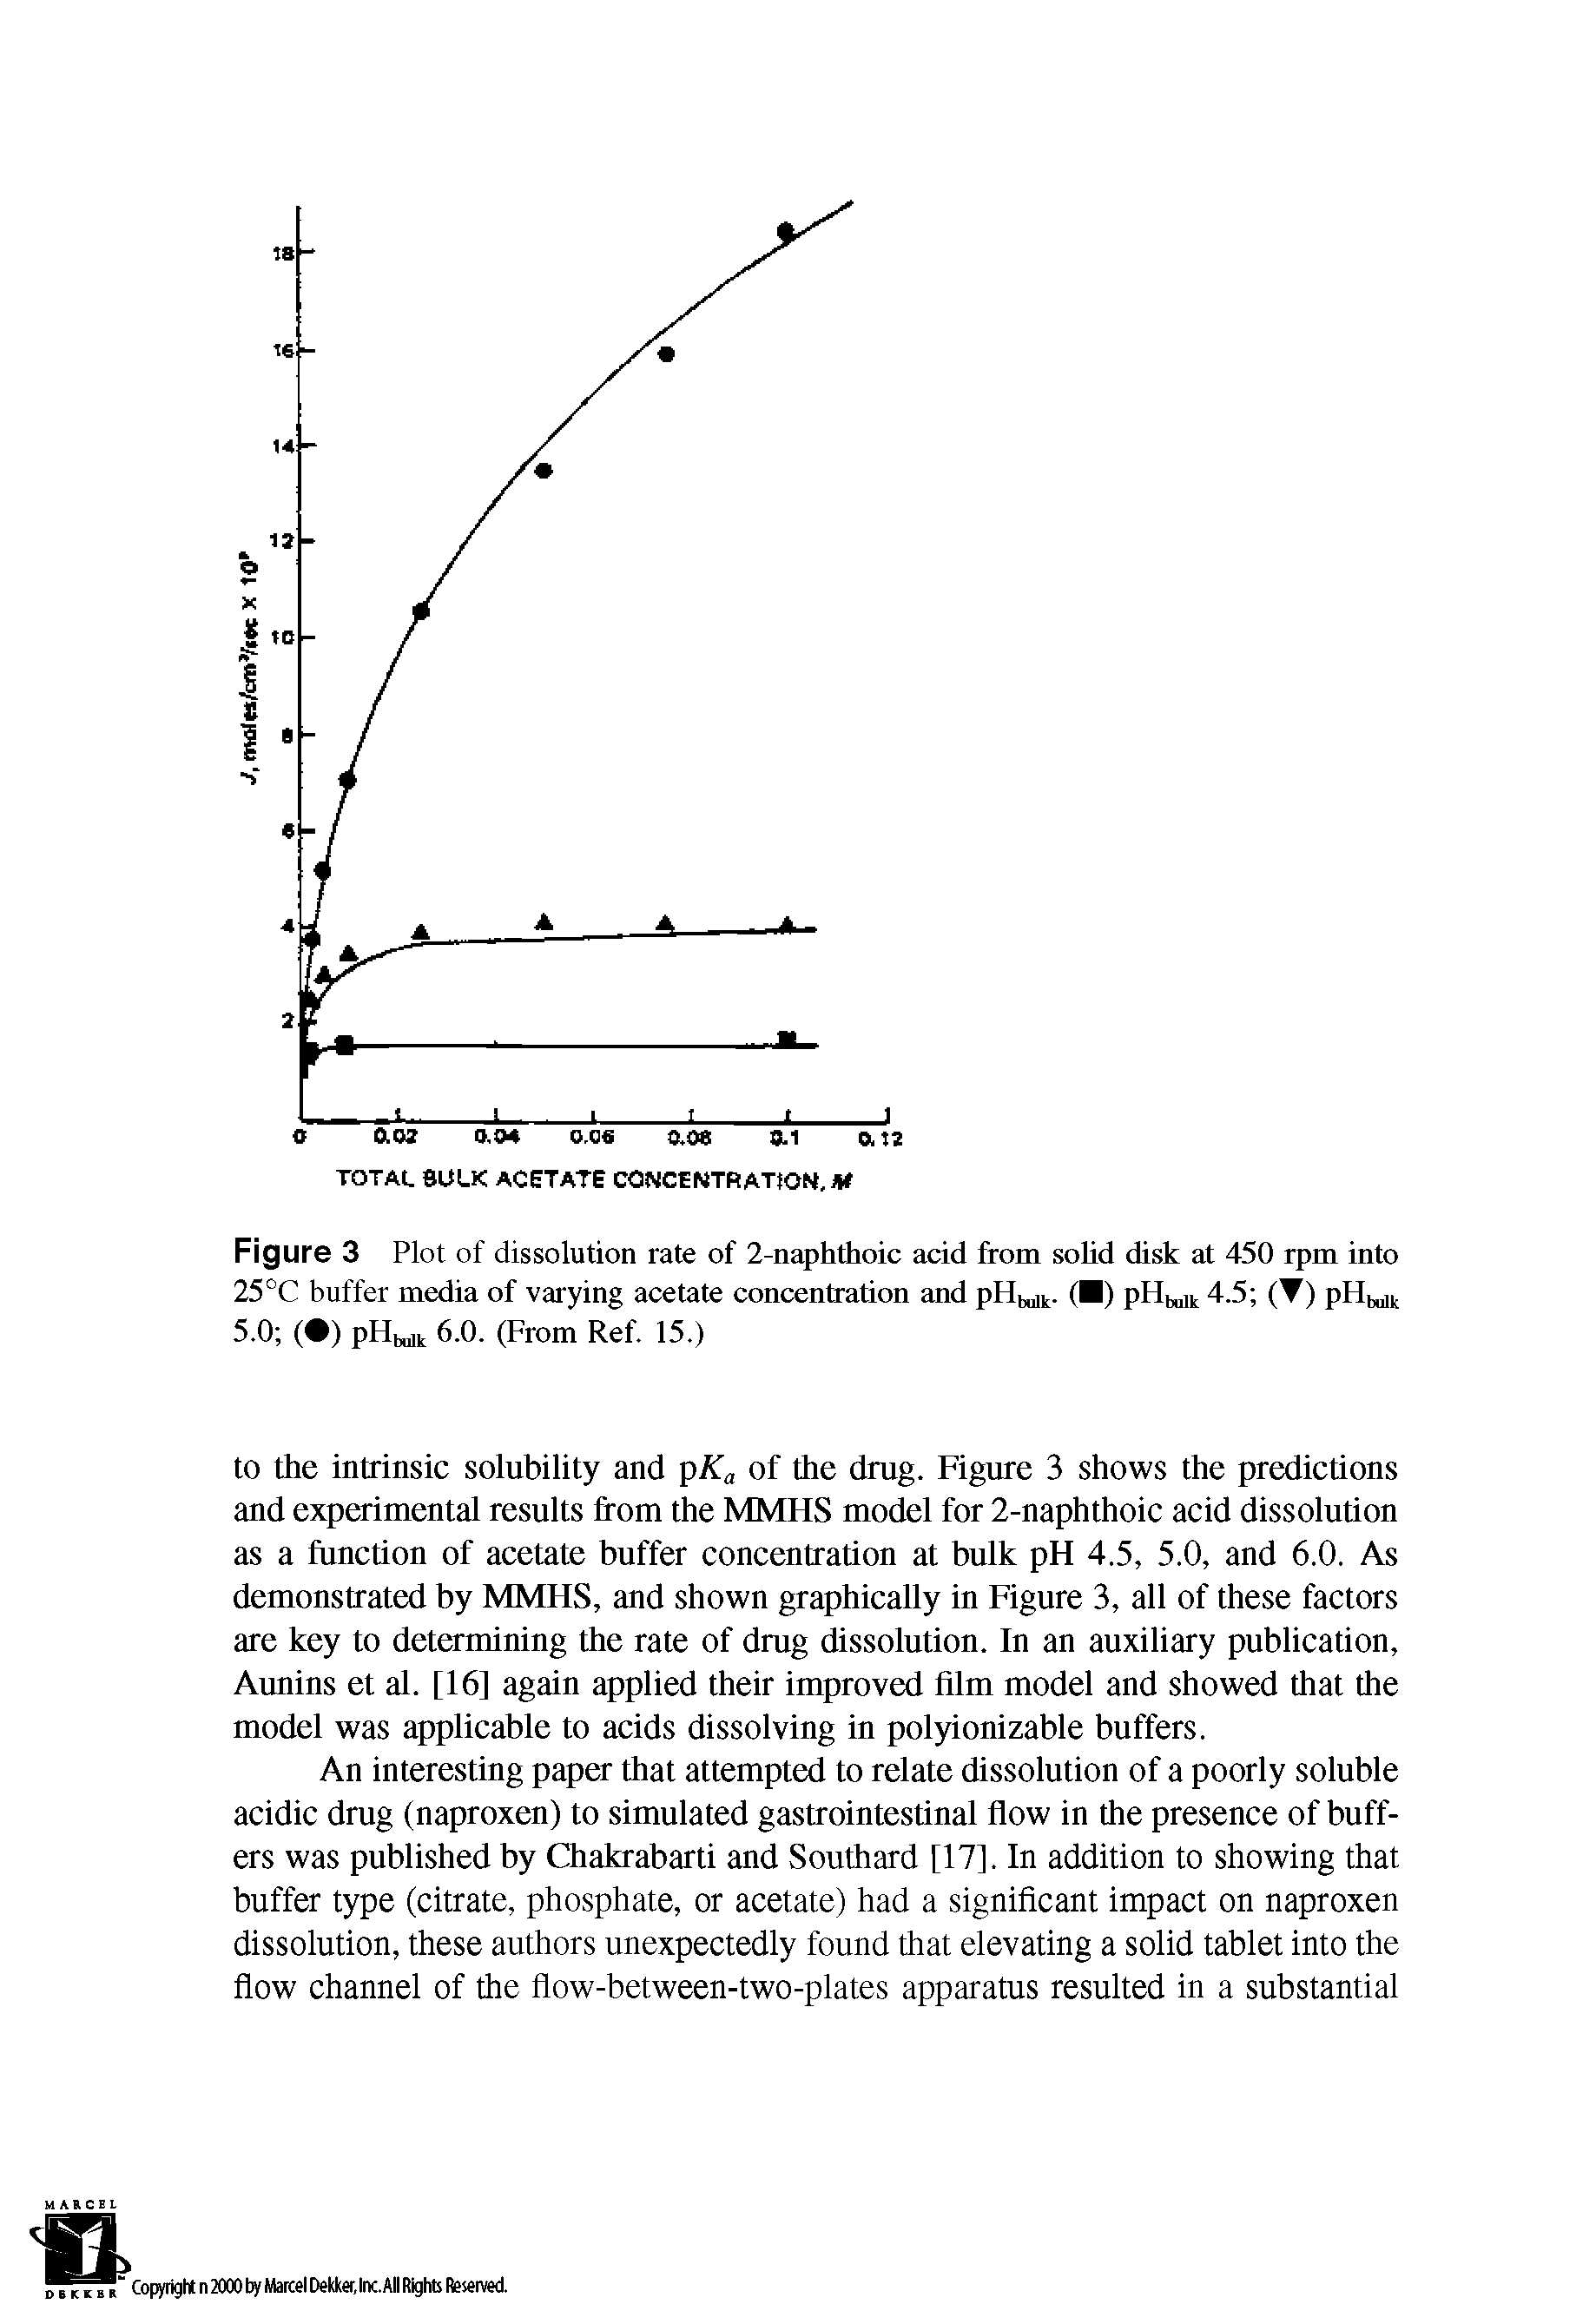 Figure 3 Plot of dissolution rate of 2-naphthoic acid from solid disk at 450 rpm into 25°C buffer media of varying acetate concentration and pHMl. ( ) pHtall 4.5 ( ) pHMt 5.0 ( ) pHMl 6.0. (From Ref. 15.)...